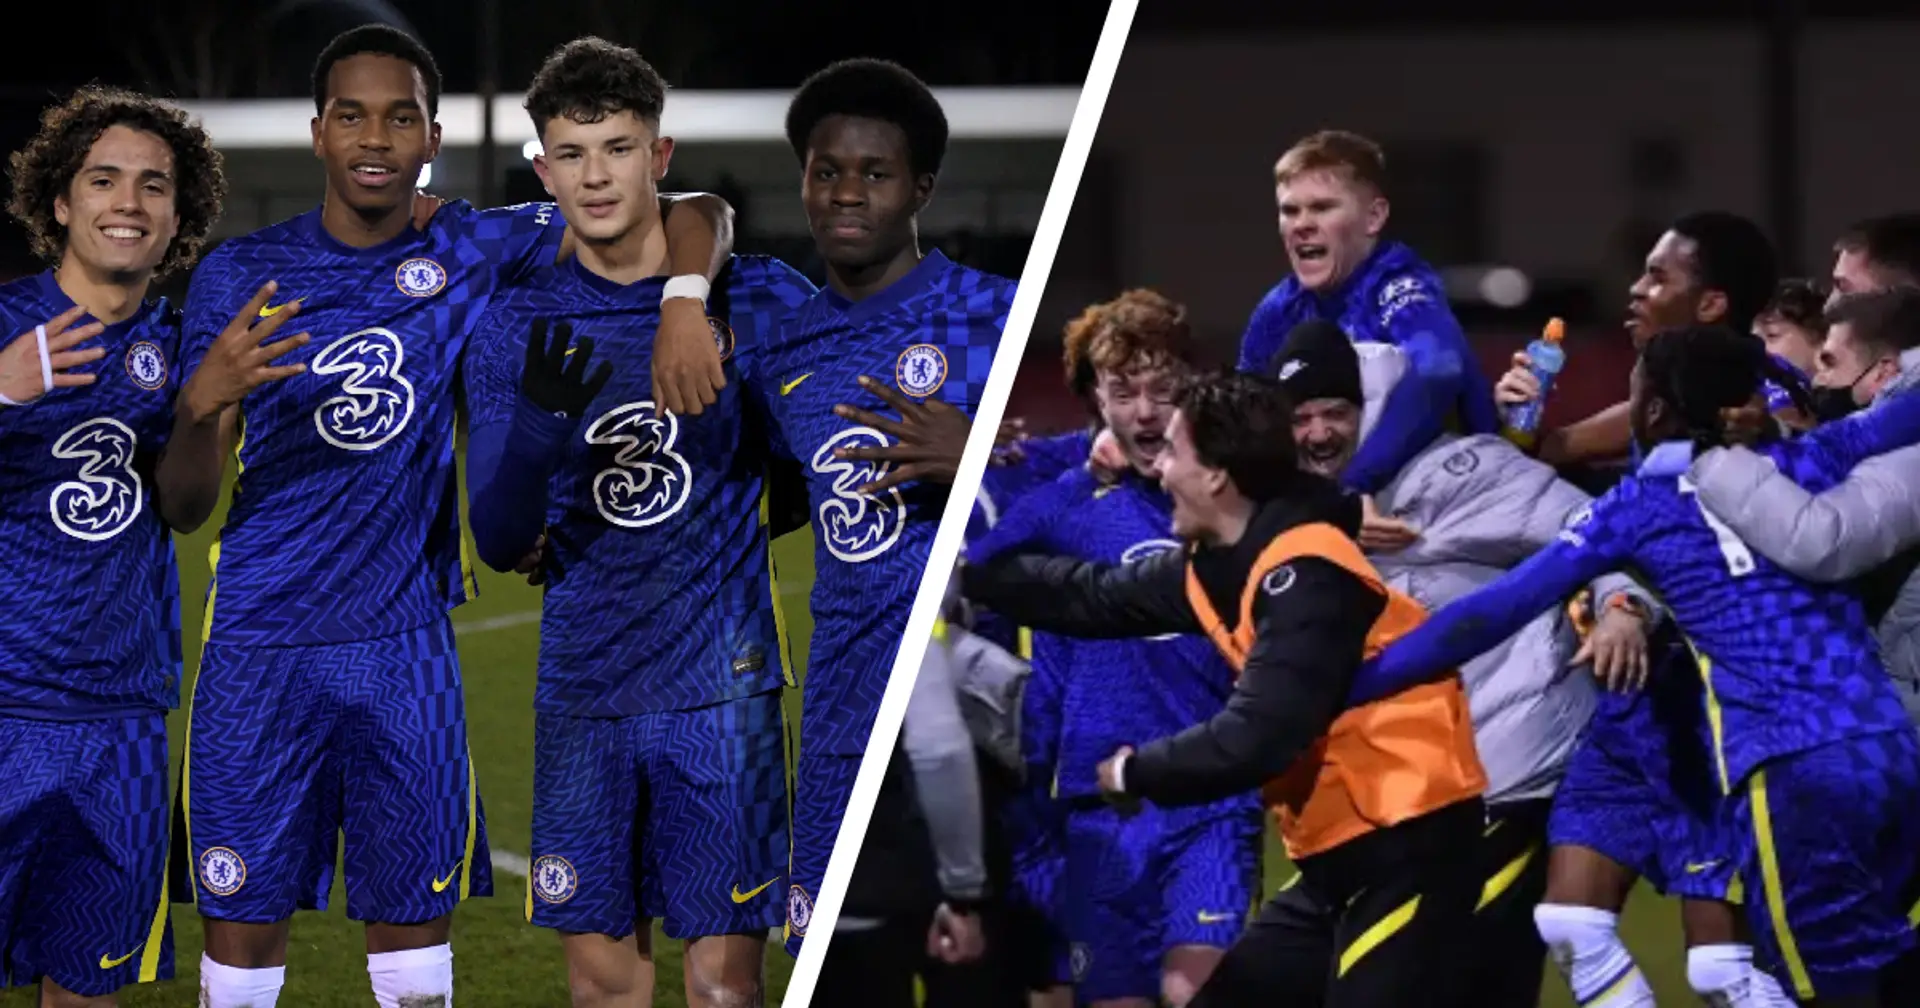 Chelsea youngsters score 4 goals in 20 minutes to come back from 3-0 down and beat Liverpool in FA Youth Cup